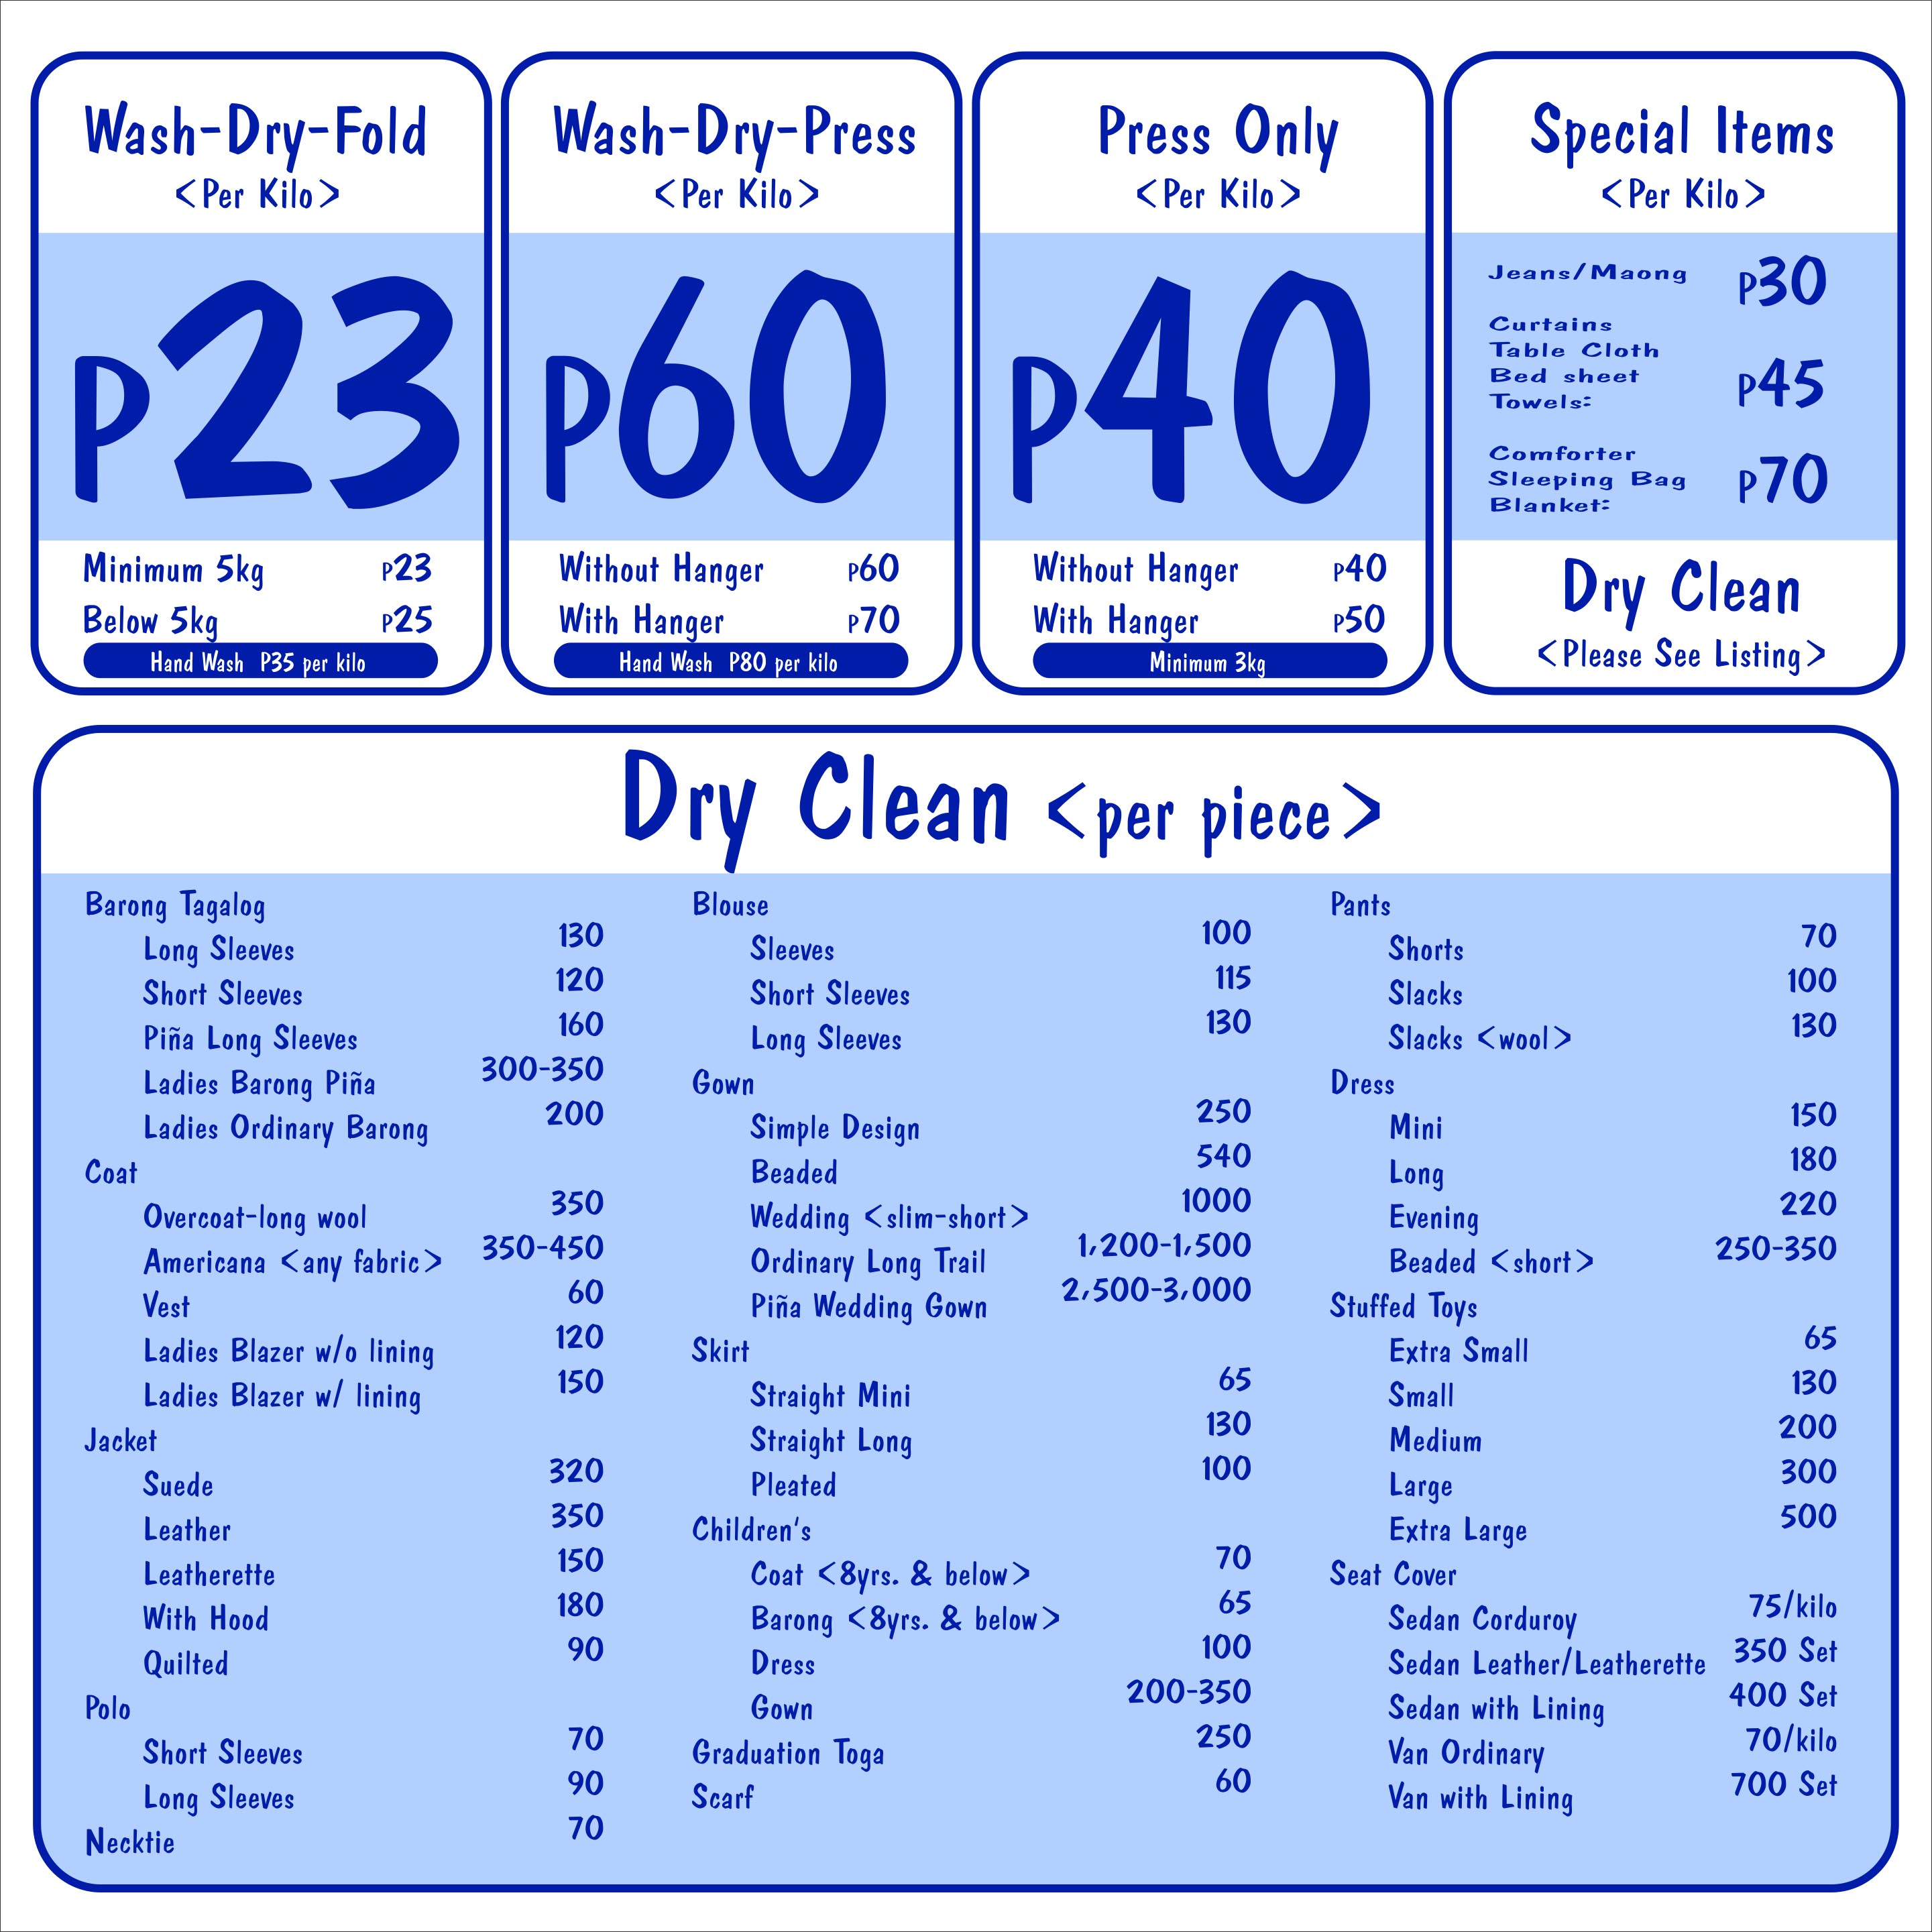 laundry business website: Pricing Strategies for your ...